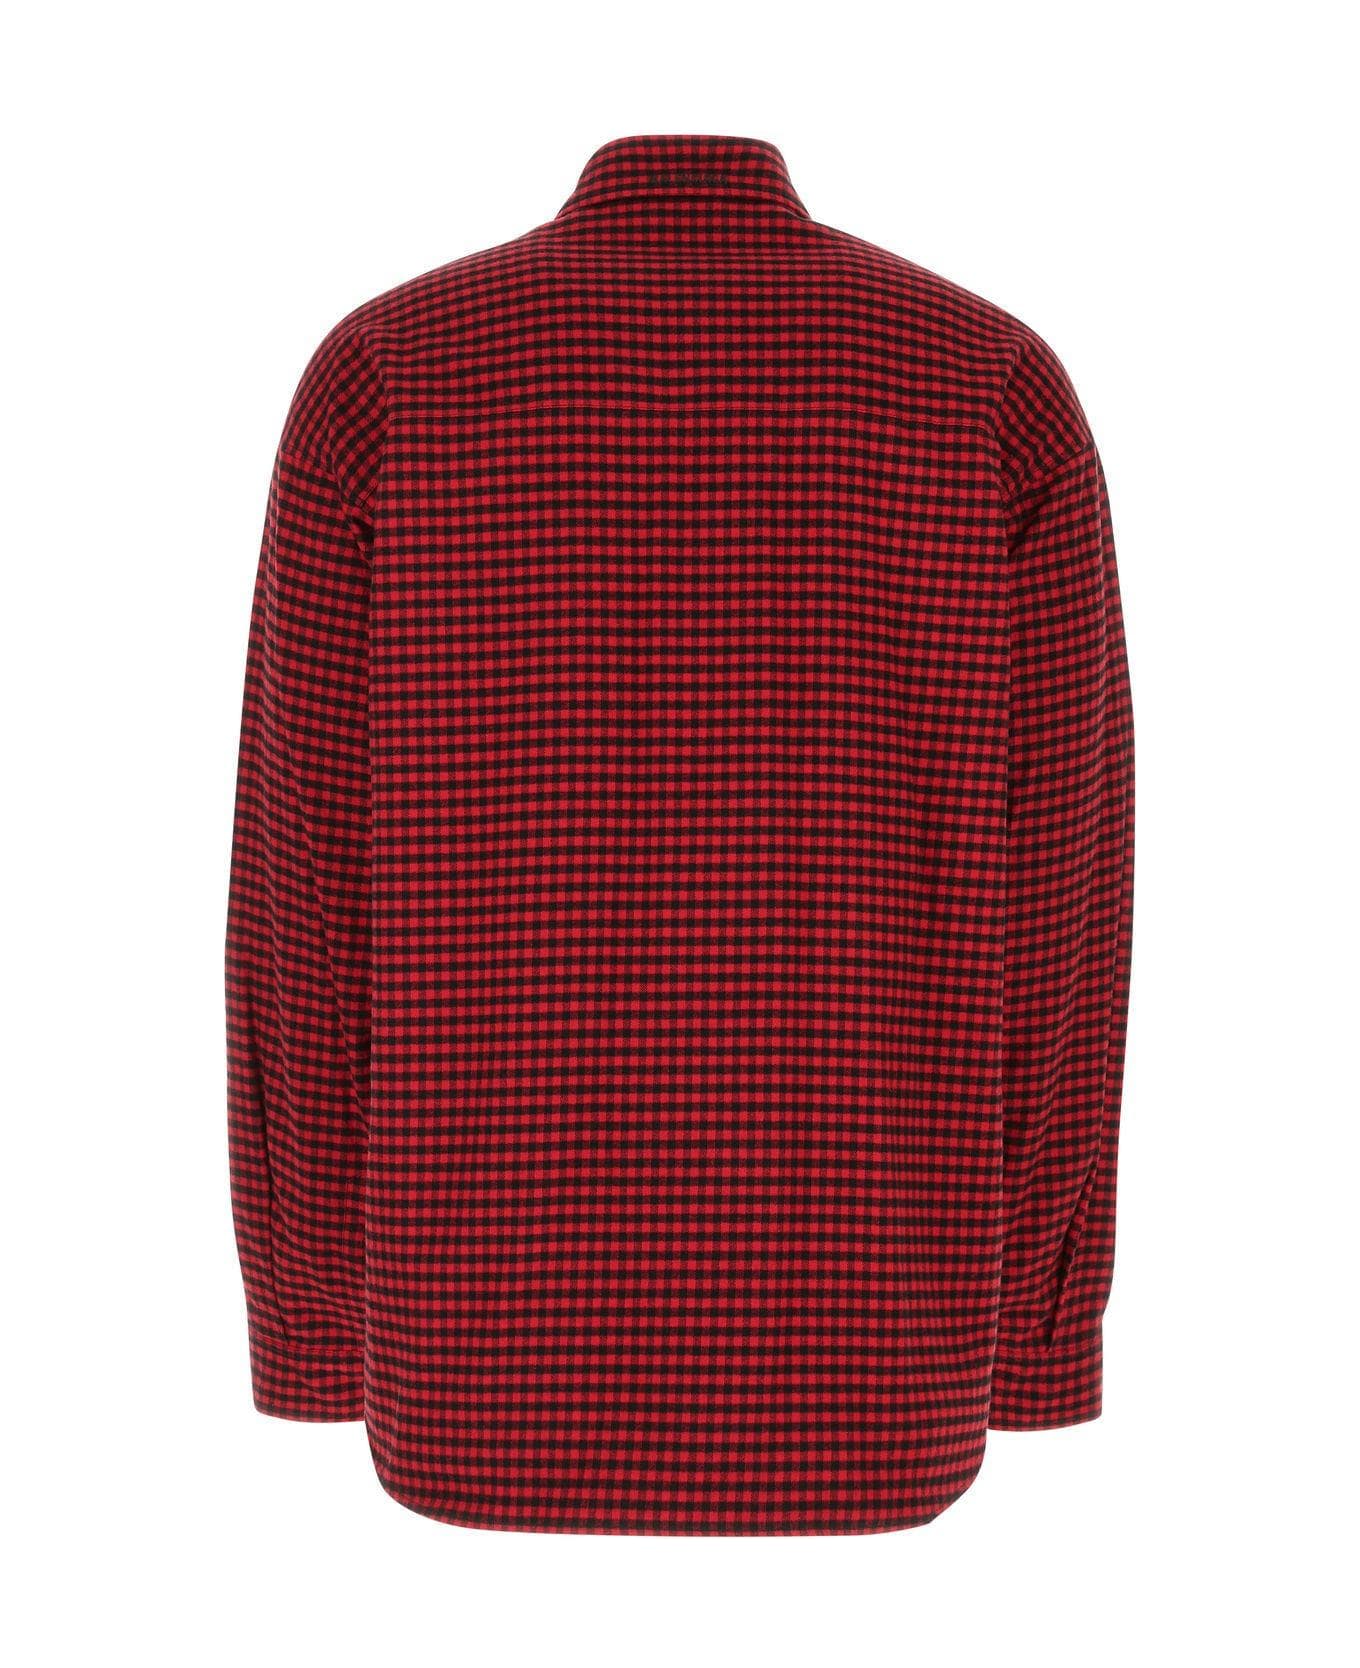 Balenciaga Embroidered Flanel Reversible Oversize Shirt - RED